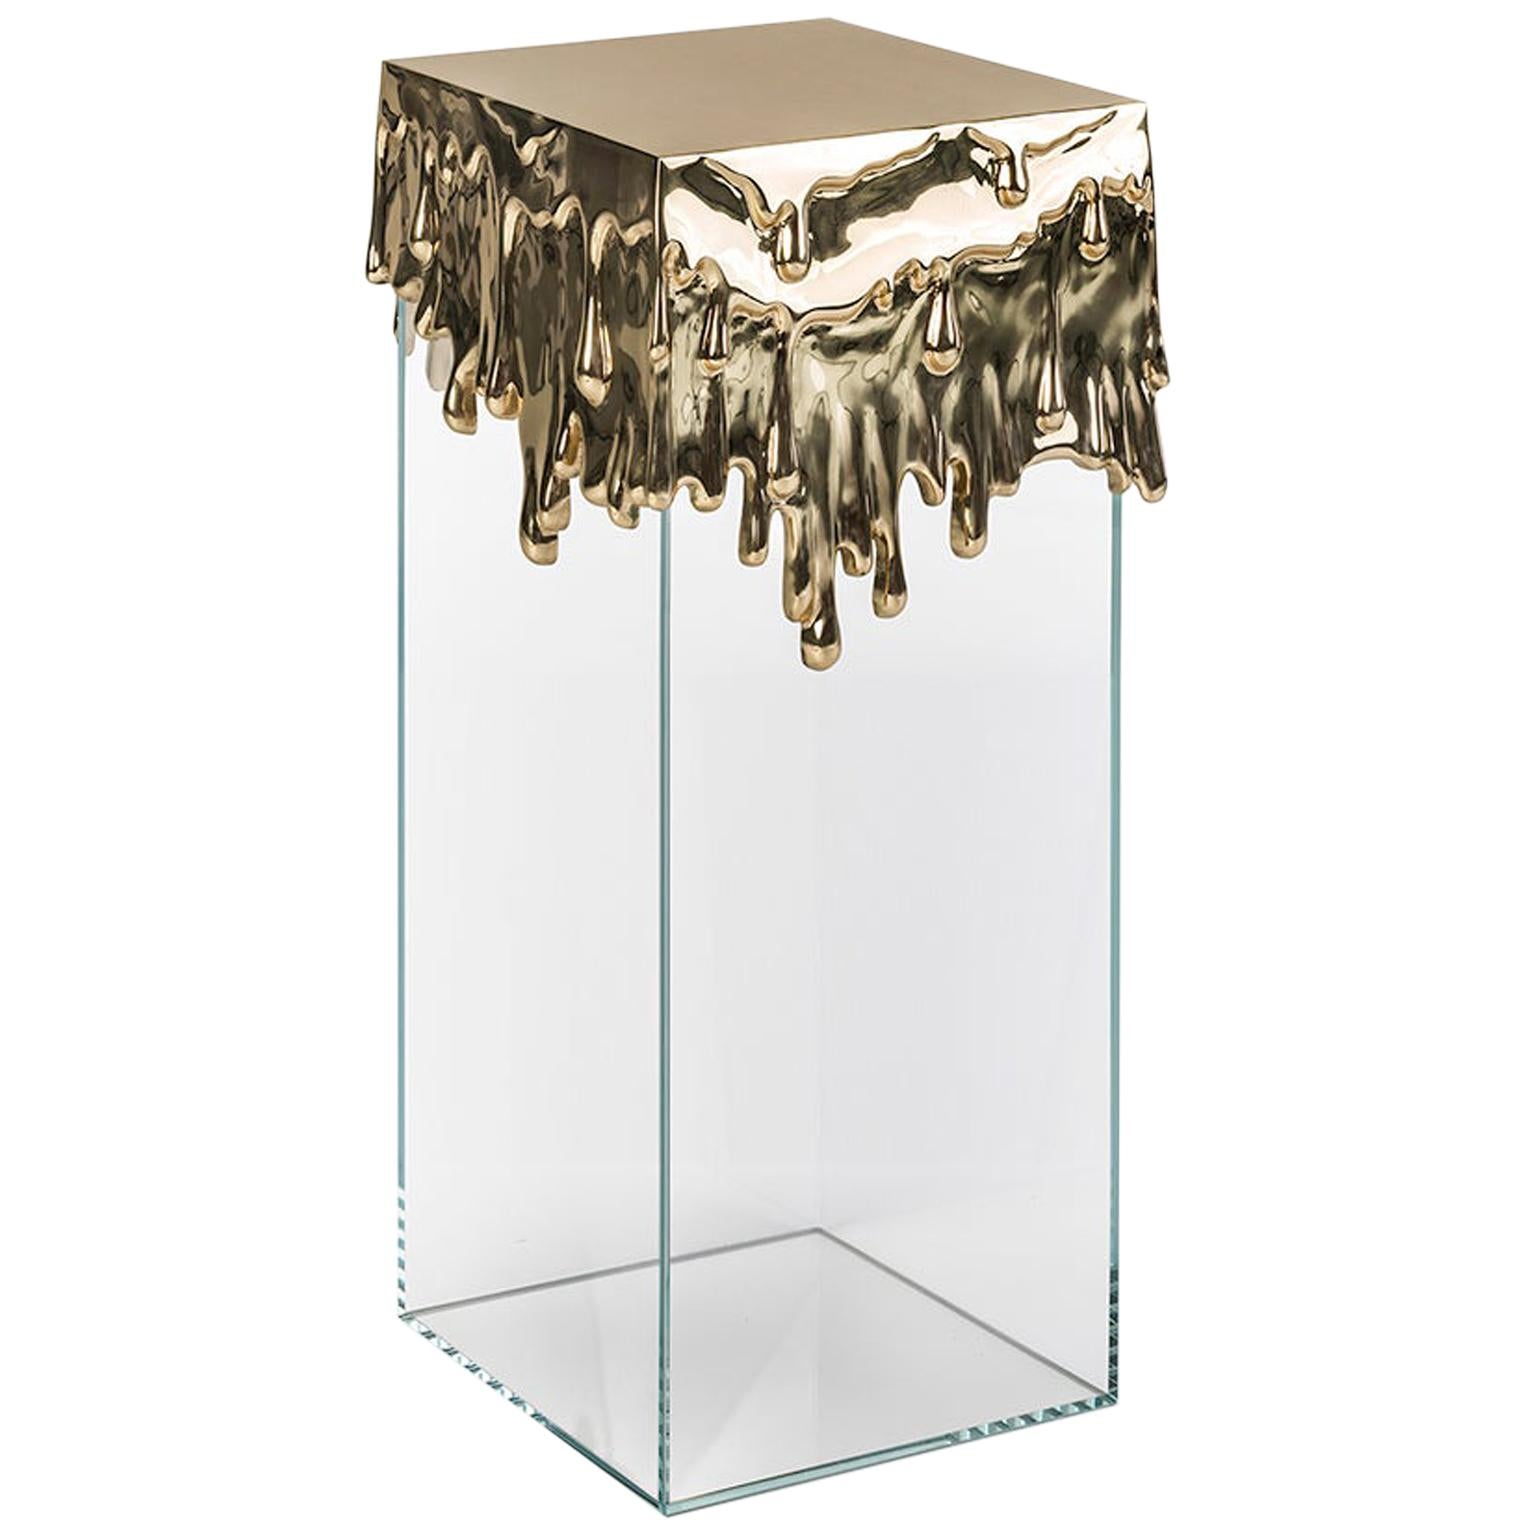 Modern Candle Pedestal in Polished Brass and Glass Base, Melted Metal Art Table